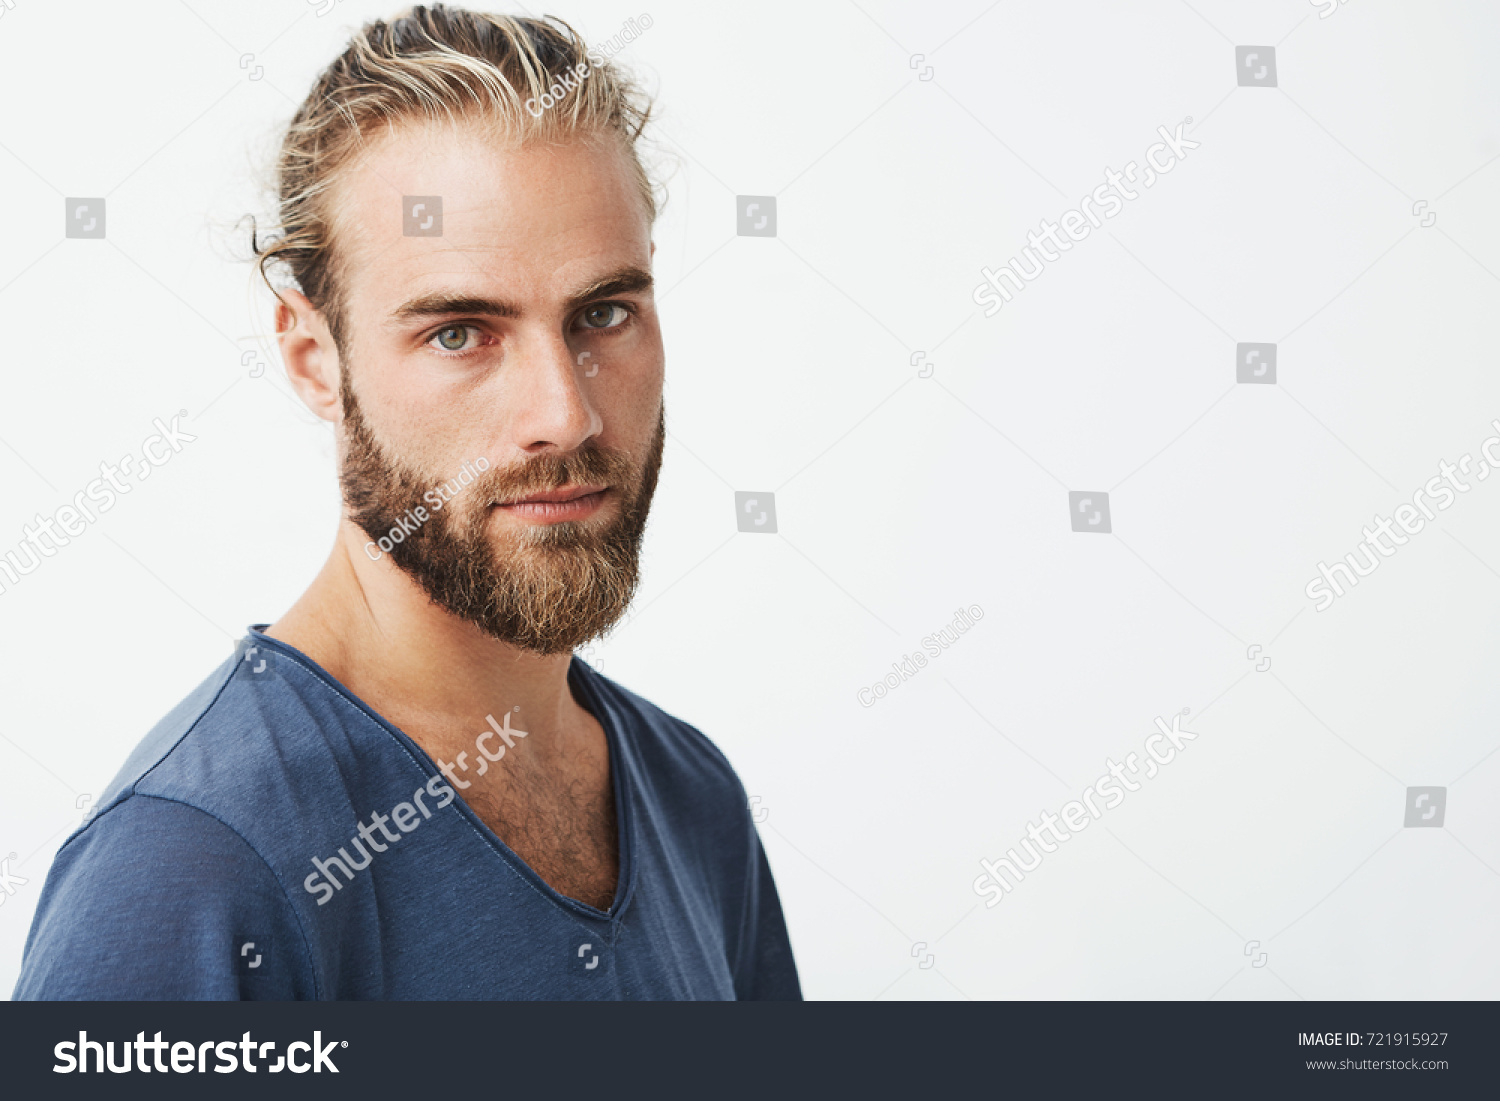 Close up of beautiful swedish man with stylish hairstyle and beard in blue t-shirt looking in camera with serious expression. #721915927